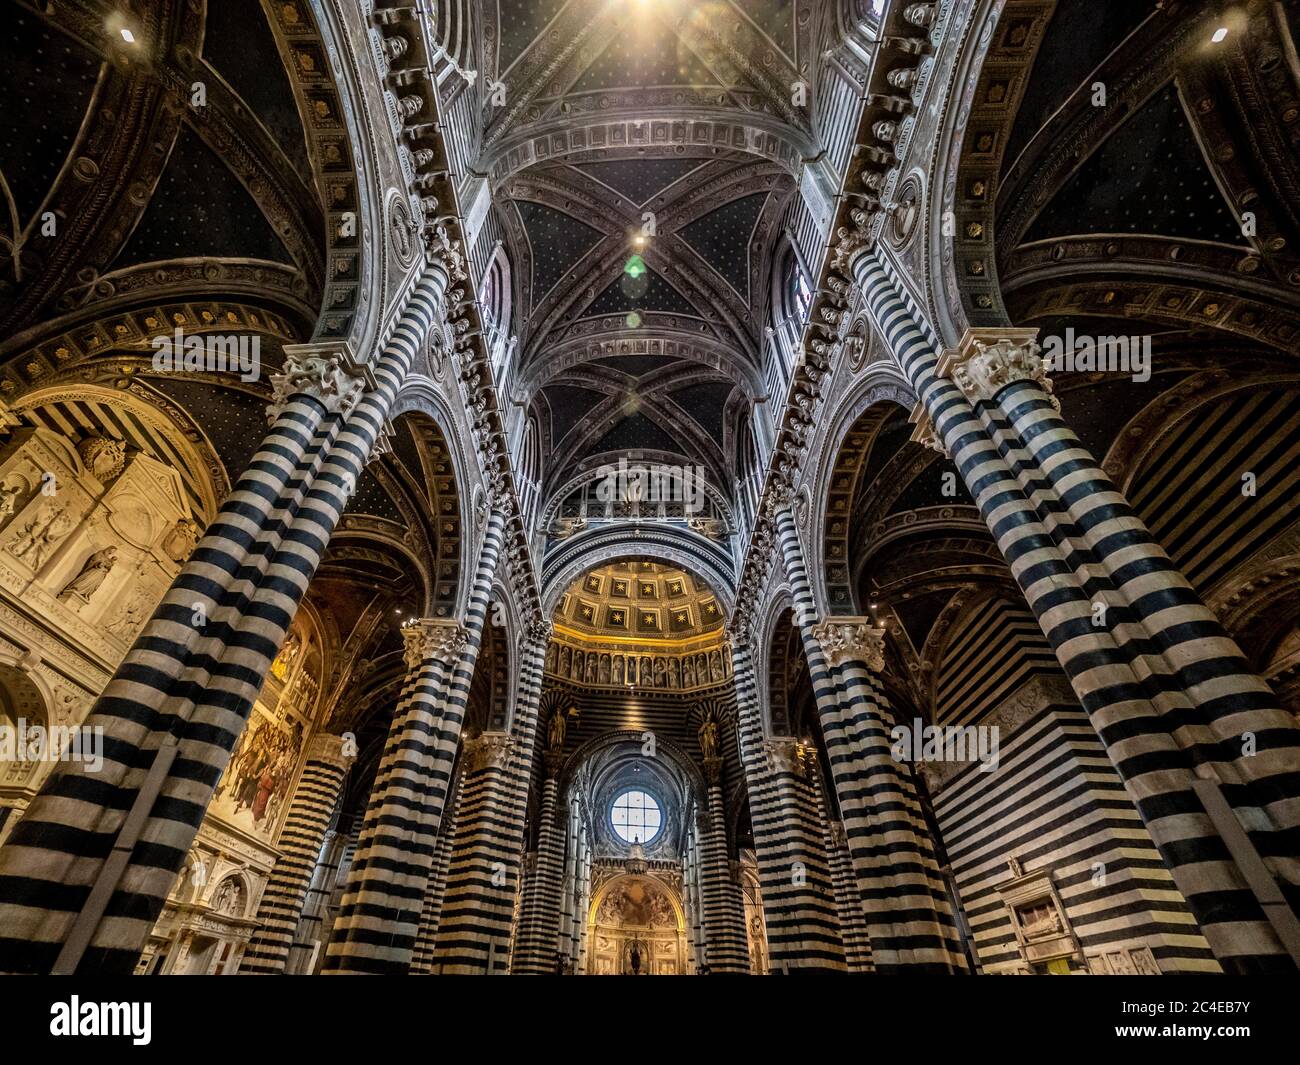 Interior view of central ceiling supported by black and white marble pillars. Siena Cathedral. Italy. Stock Photo